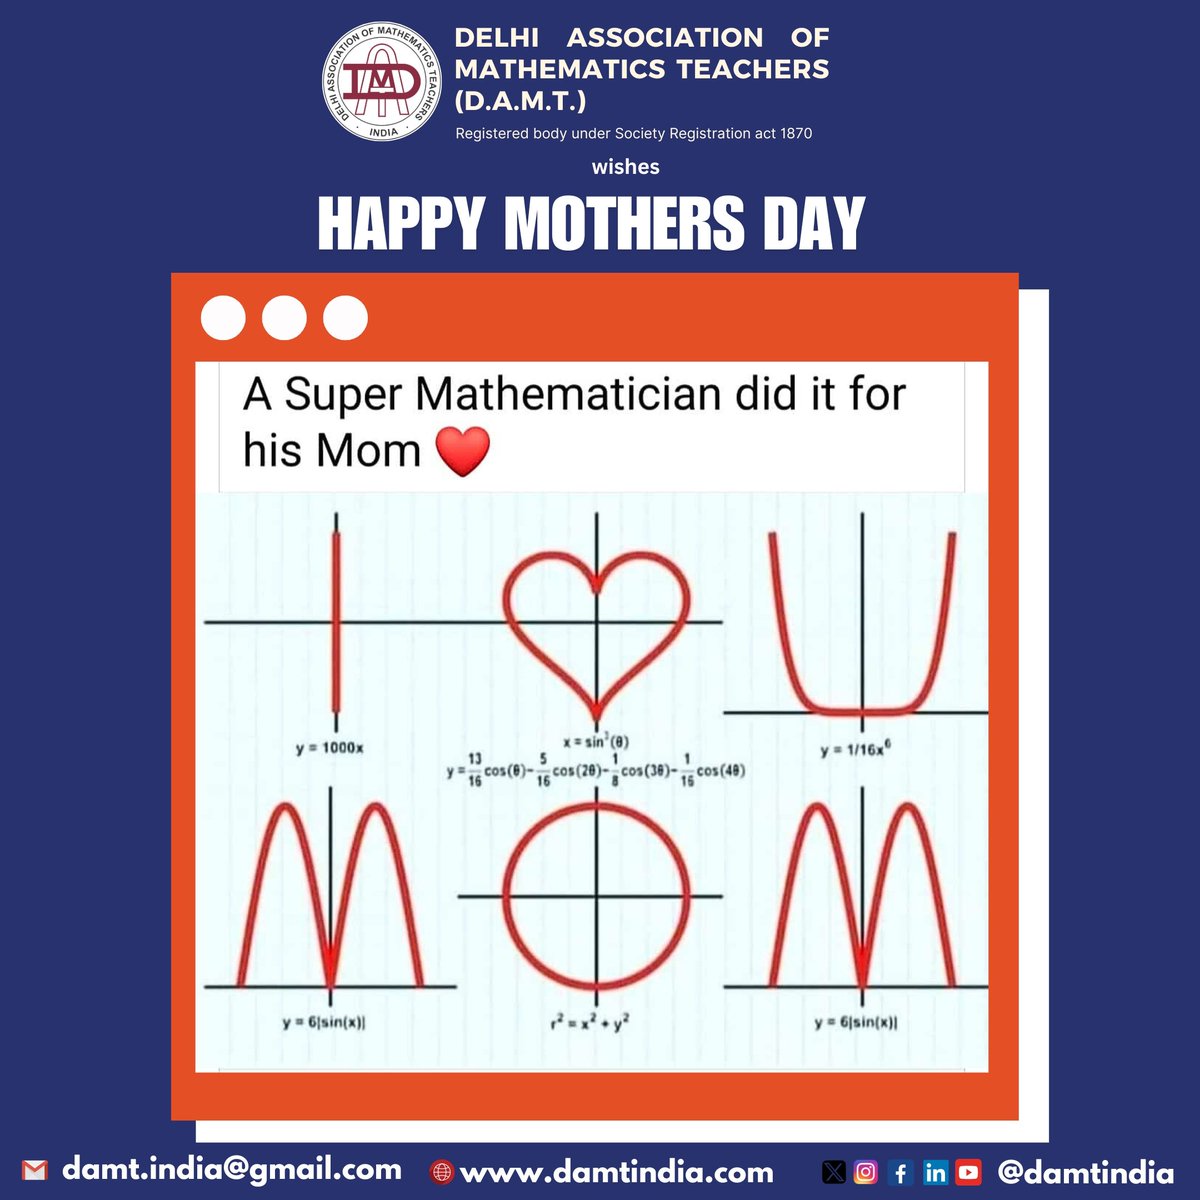 Happy Mother's Day! 🌸 Like 'e', a mother's love is an irrational constant—beyond logic, full of heart. Today we celebrate our first teachers, our moms, who showed us love is life's greatest common divisor. #MothersDay #MathLove